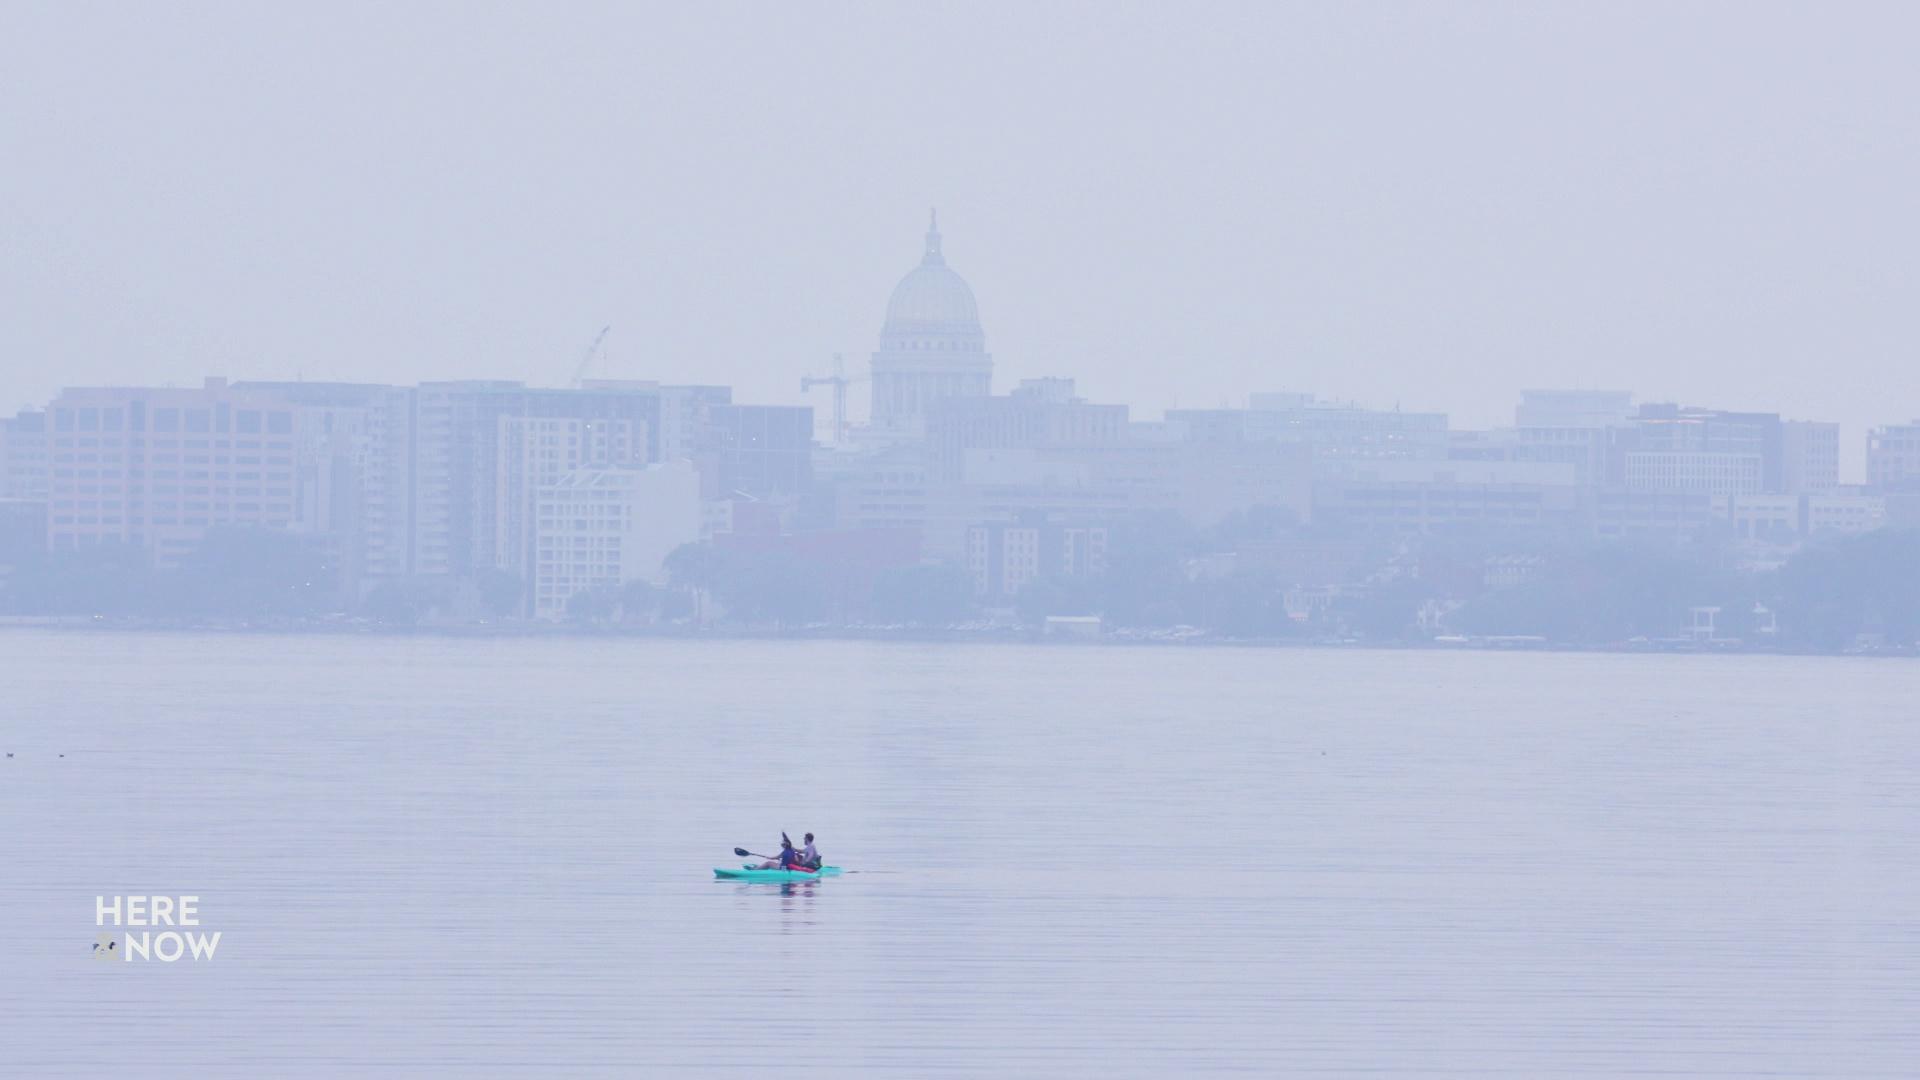 An image shows a hazy skyline of Madison behind water with a single kayak in the foreground.